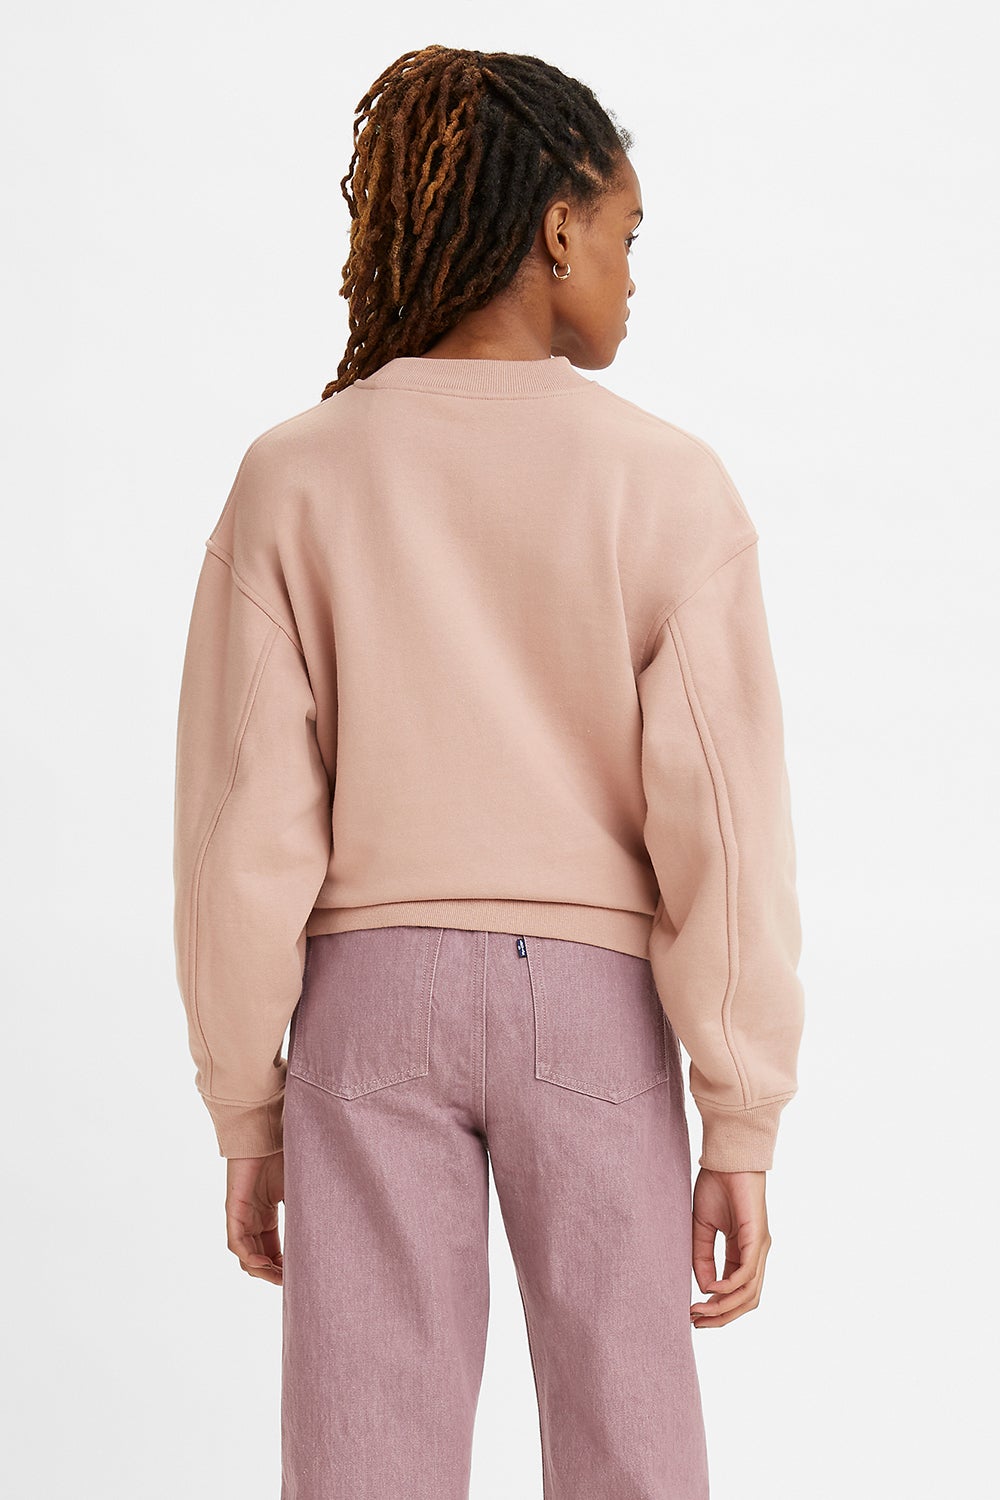 Levi's Made and Crafted Classic Crewneck Fawn